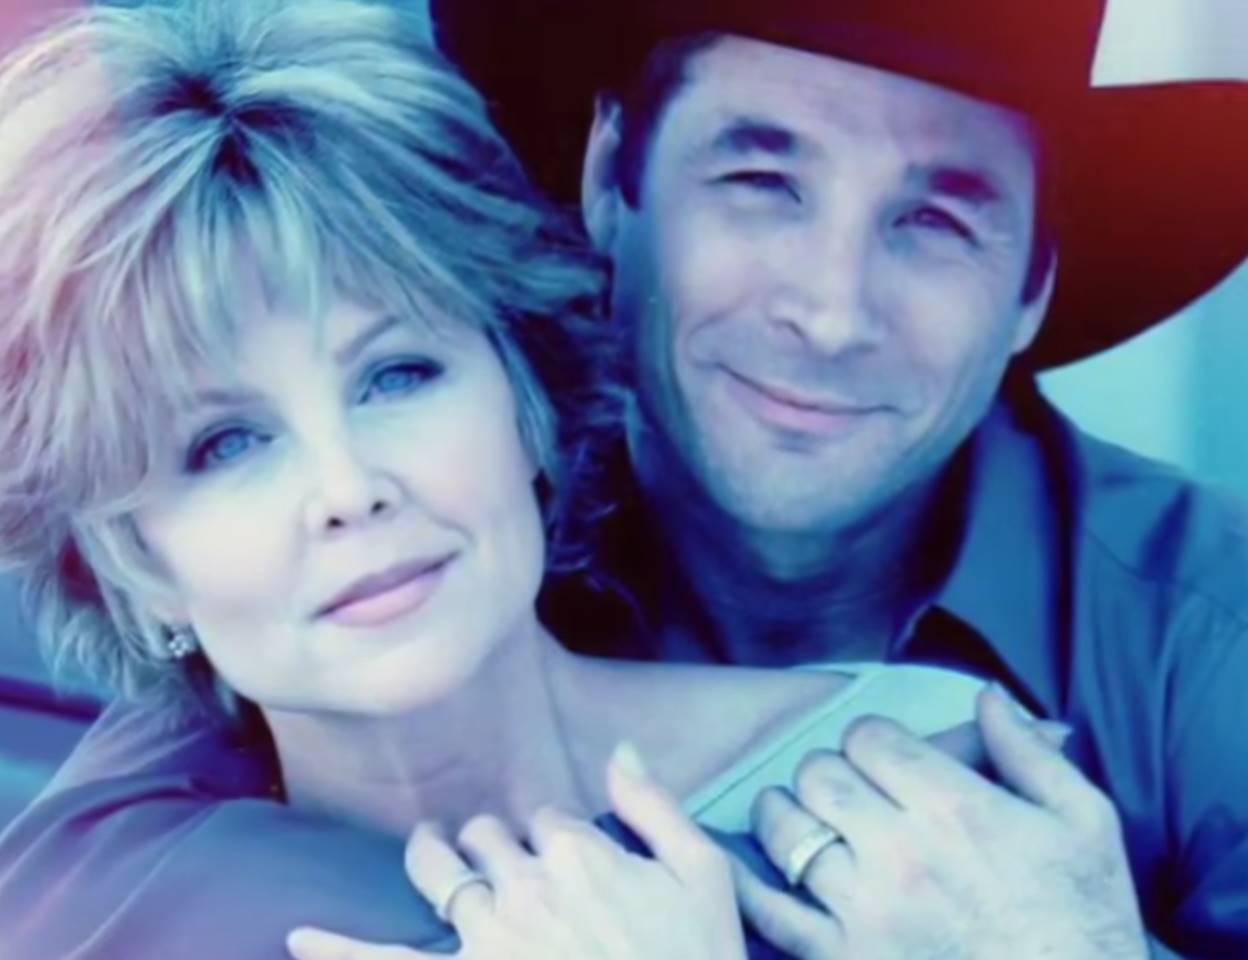 Who are Clint Black and Lisa Hartman?